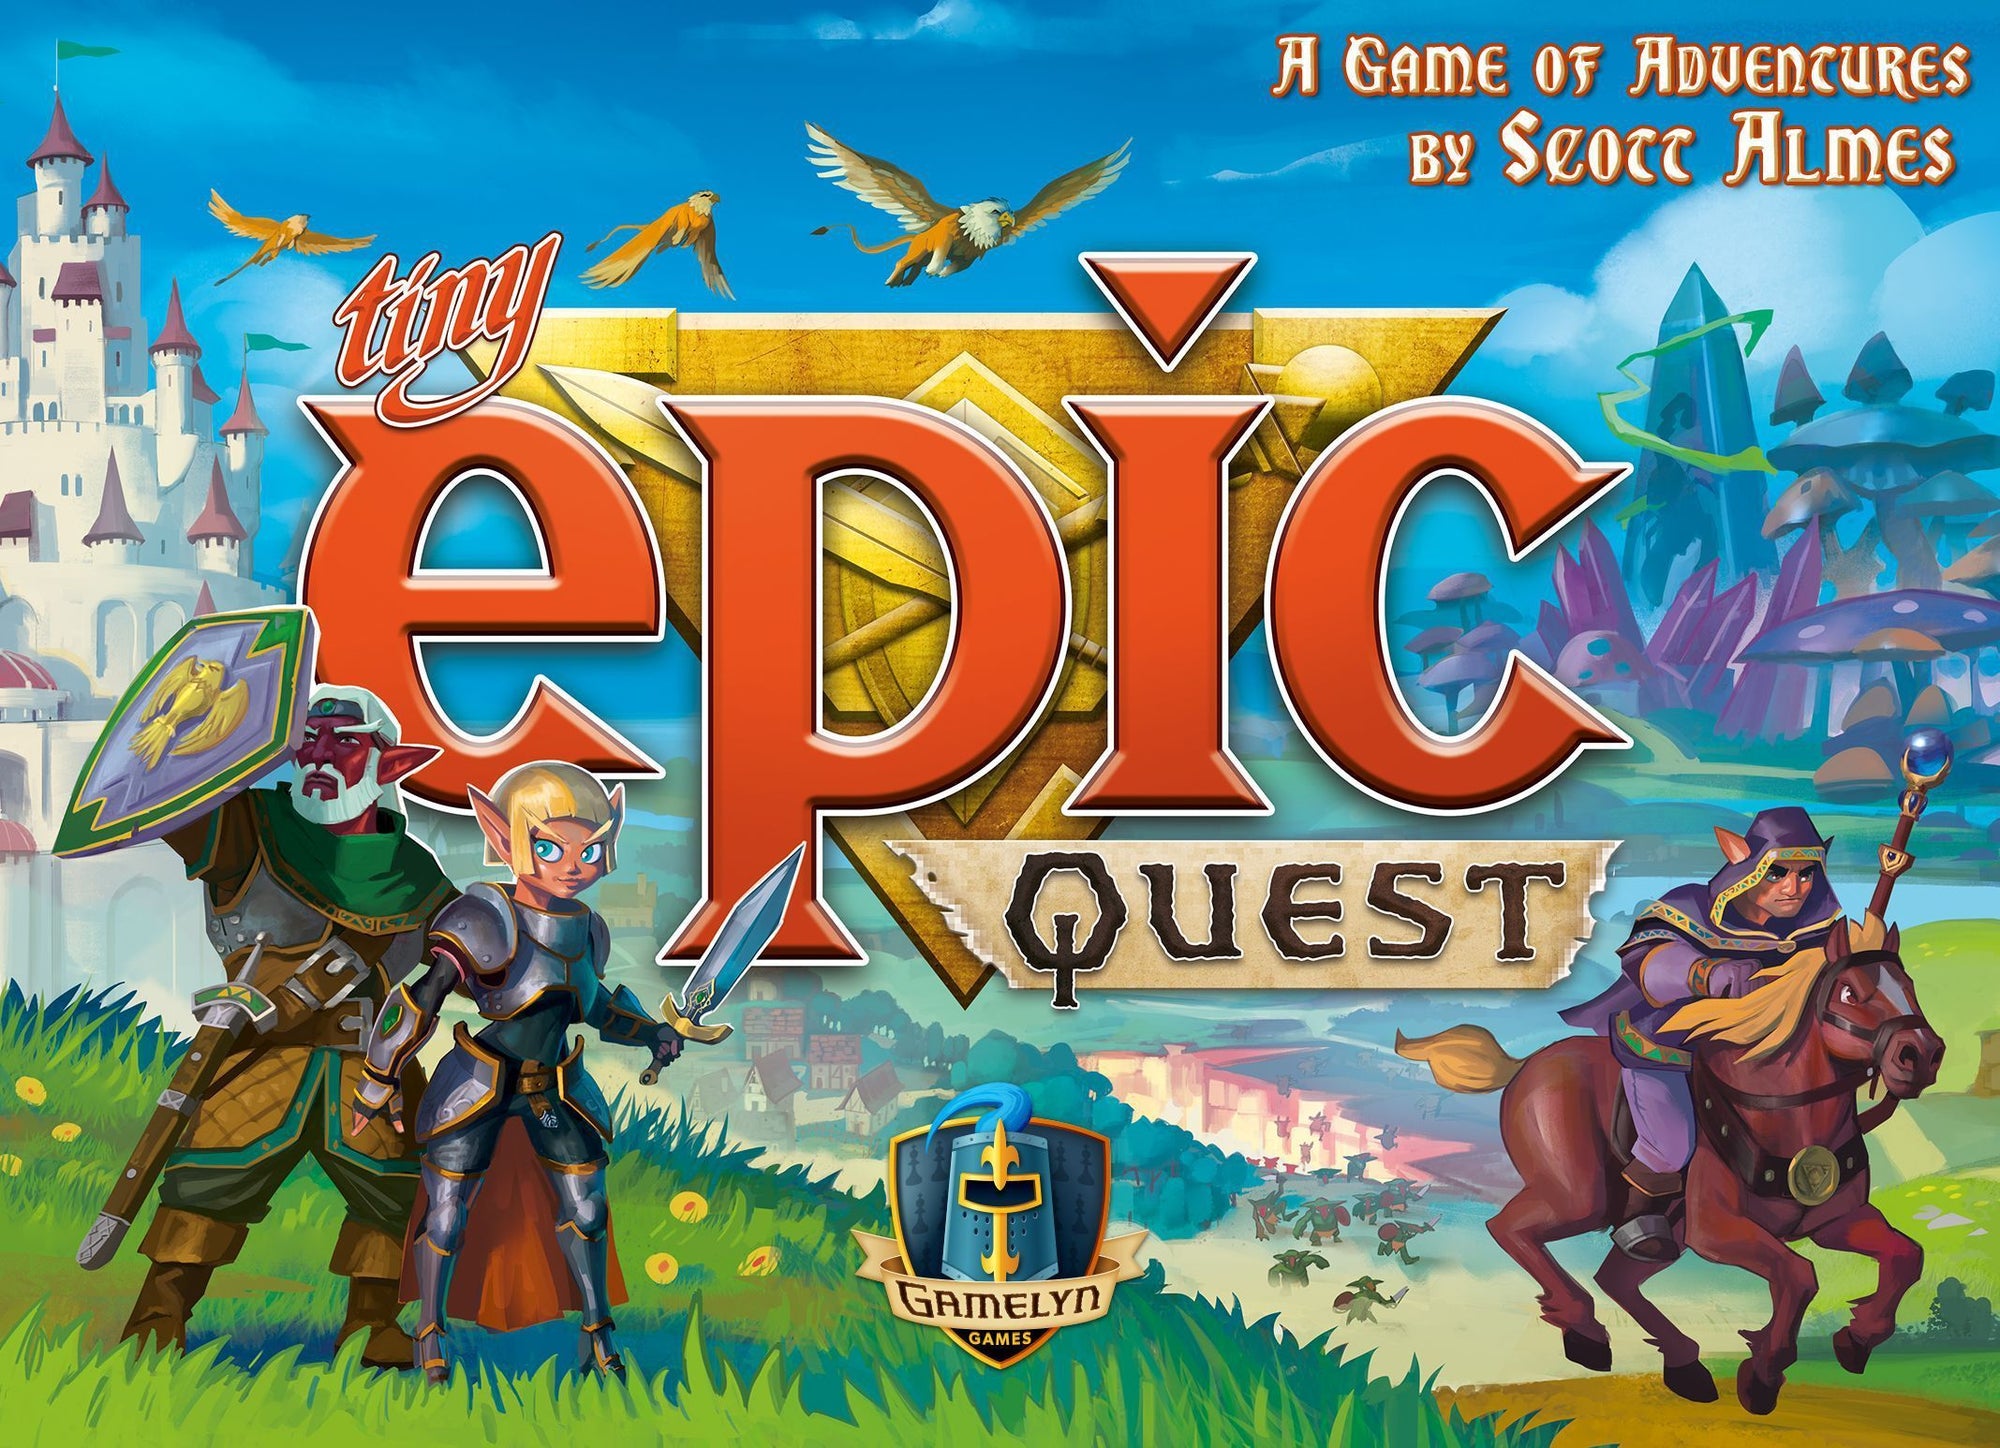 Quest Epic Quest - Deluxe Edition (Kickstarter Special) משחק לוח קיקסטארטר Gamelyn Games